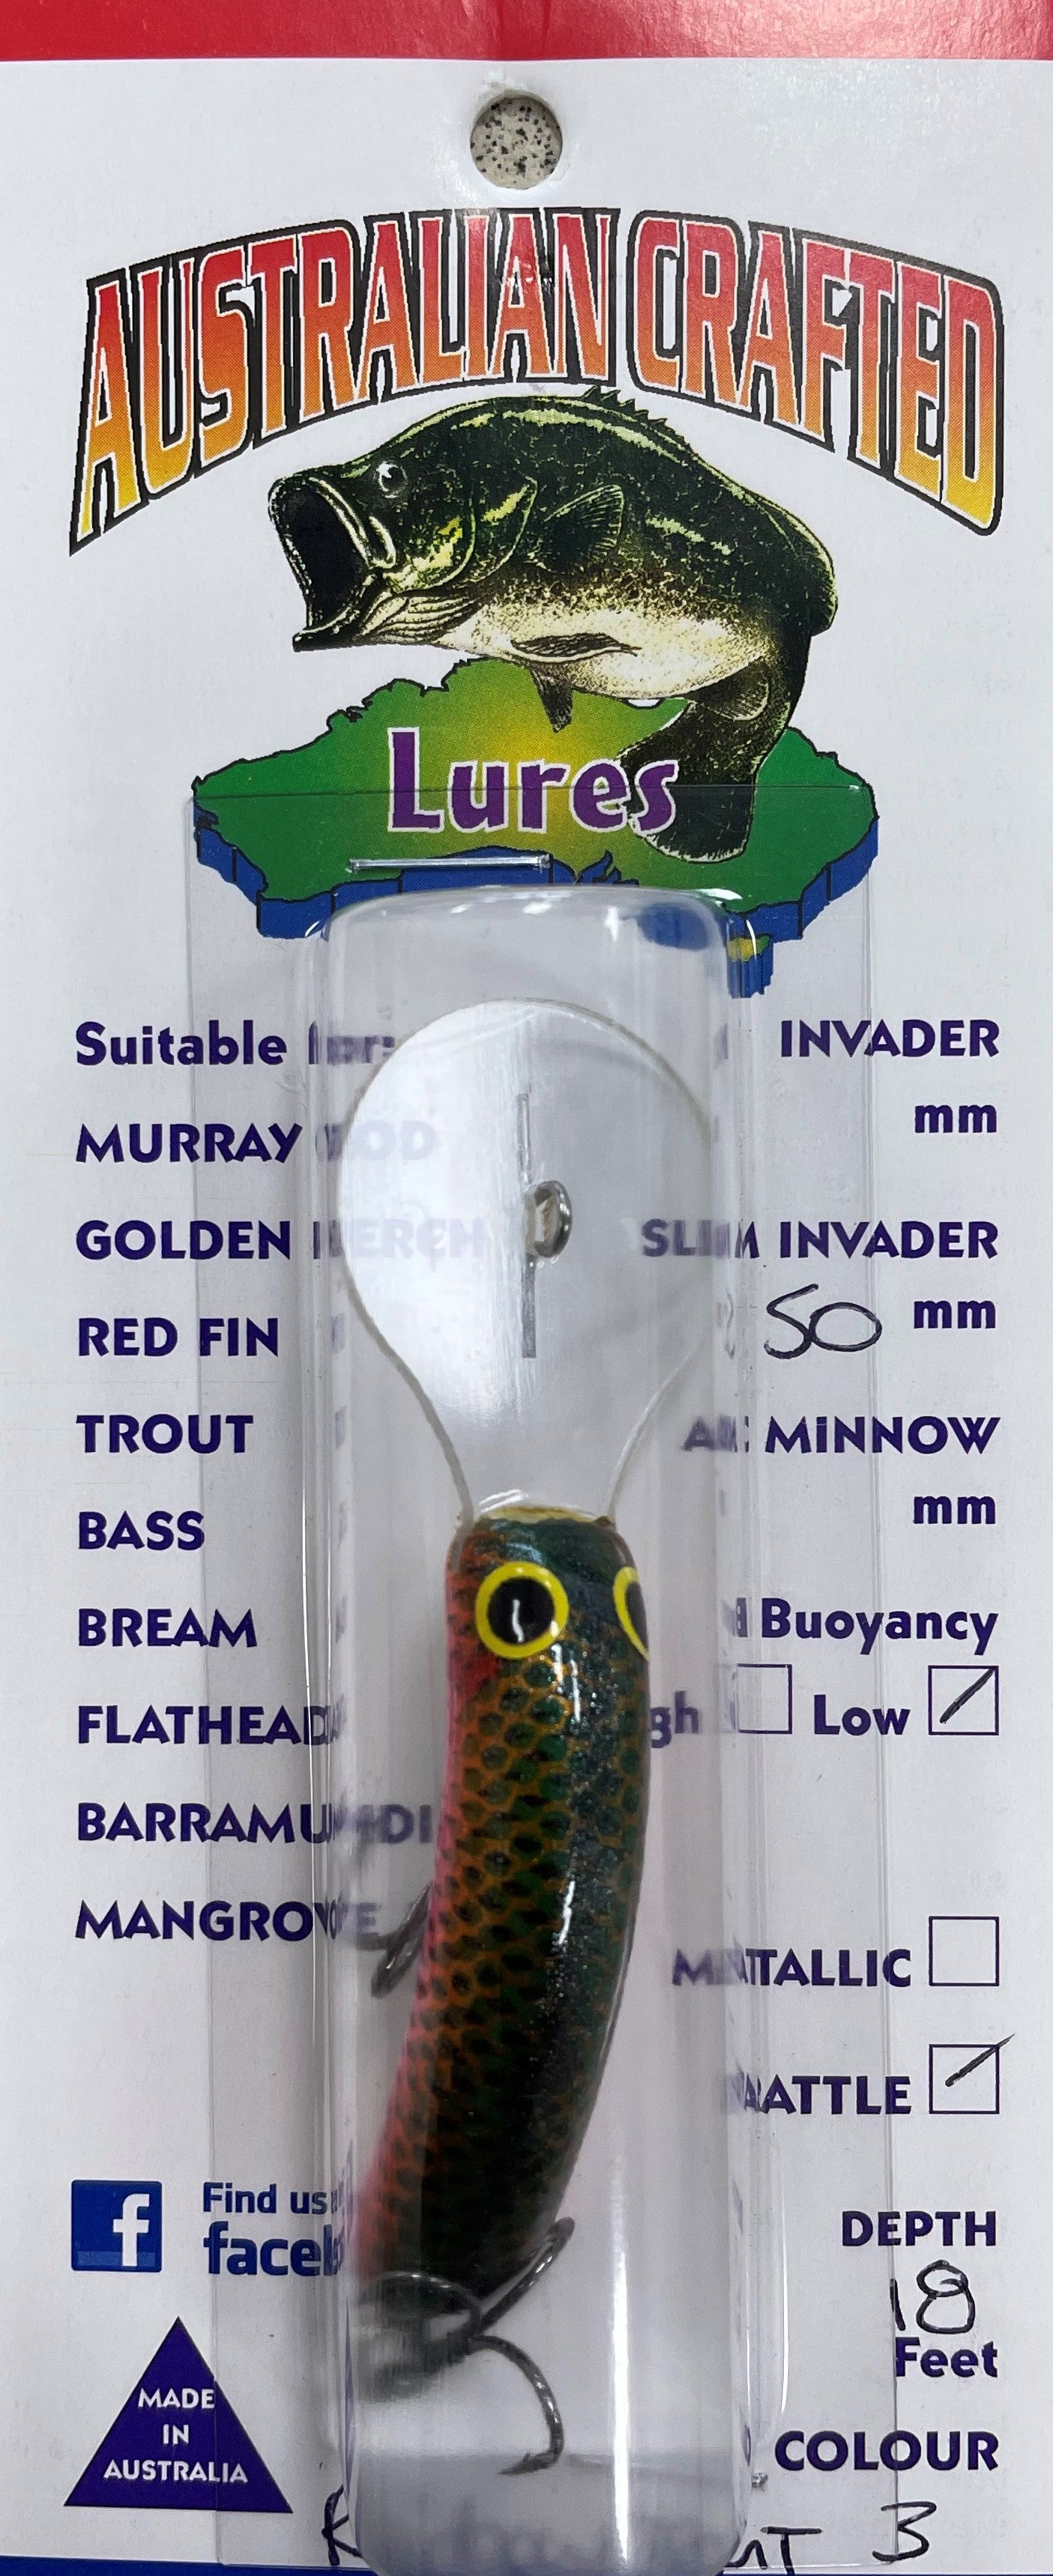 Australian Crafted Lures - Slim Invader 50mm 18ft (#3 Rainbow